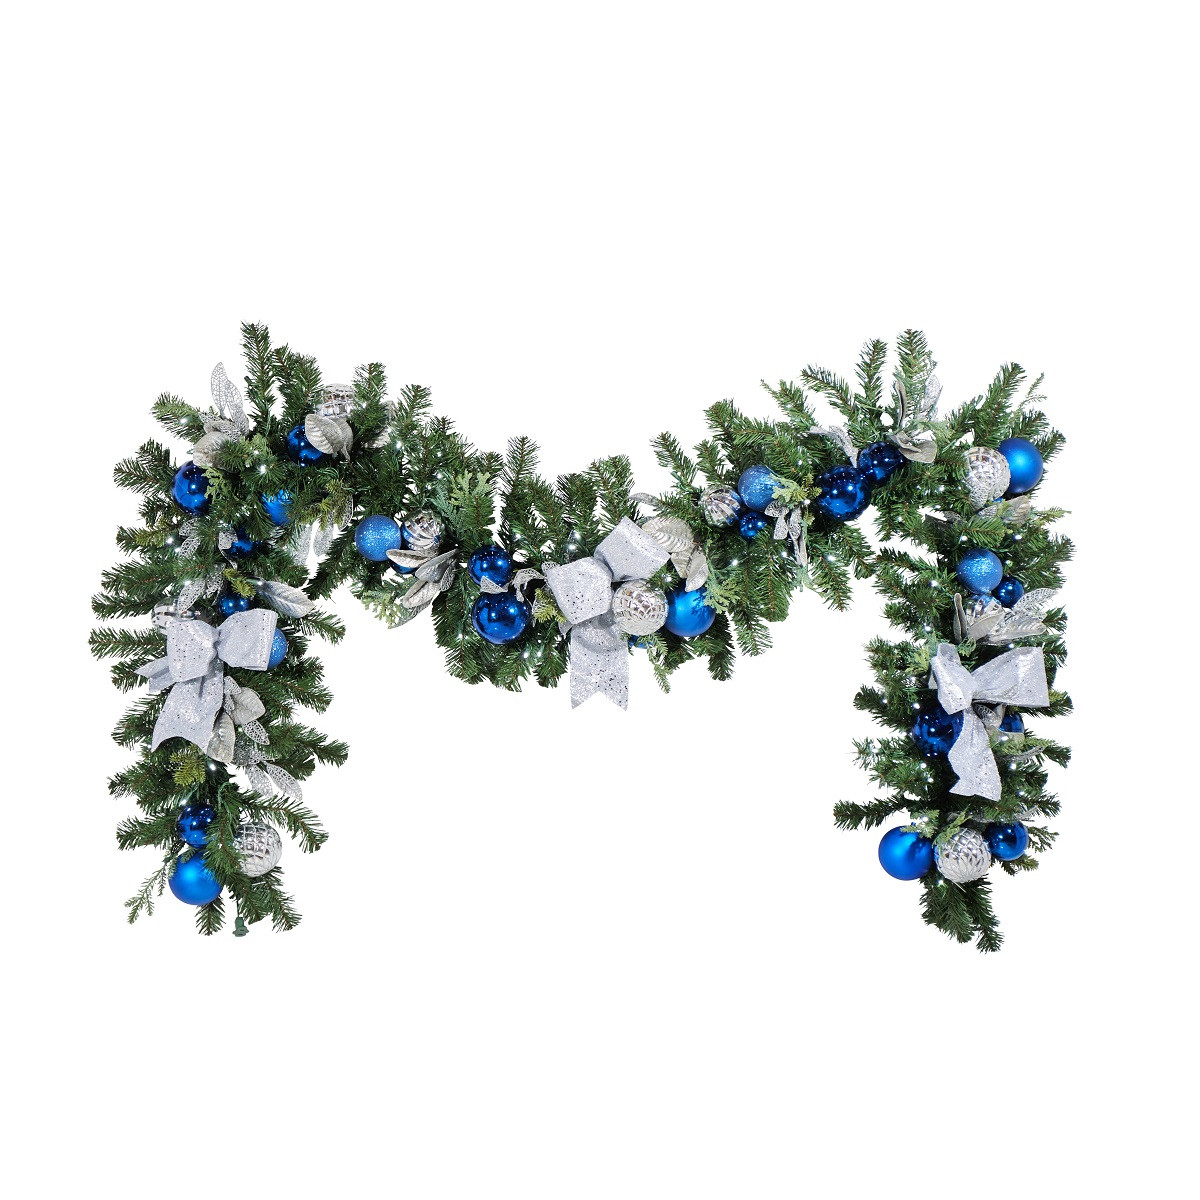 Garland 18x9 Pre-Decorated Blue and Silver w/LED Minis - Case of 3